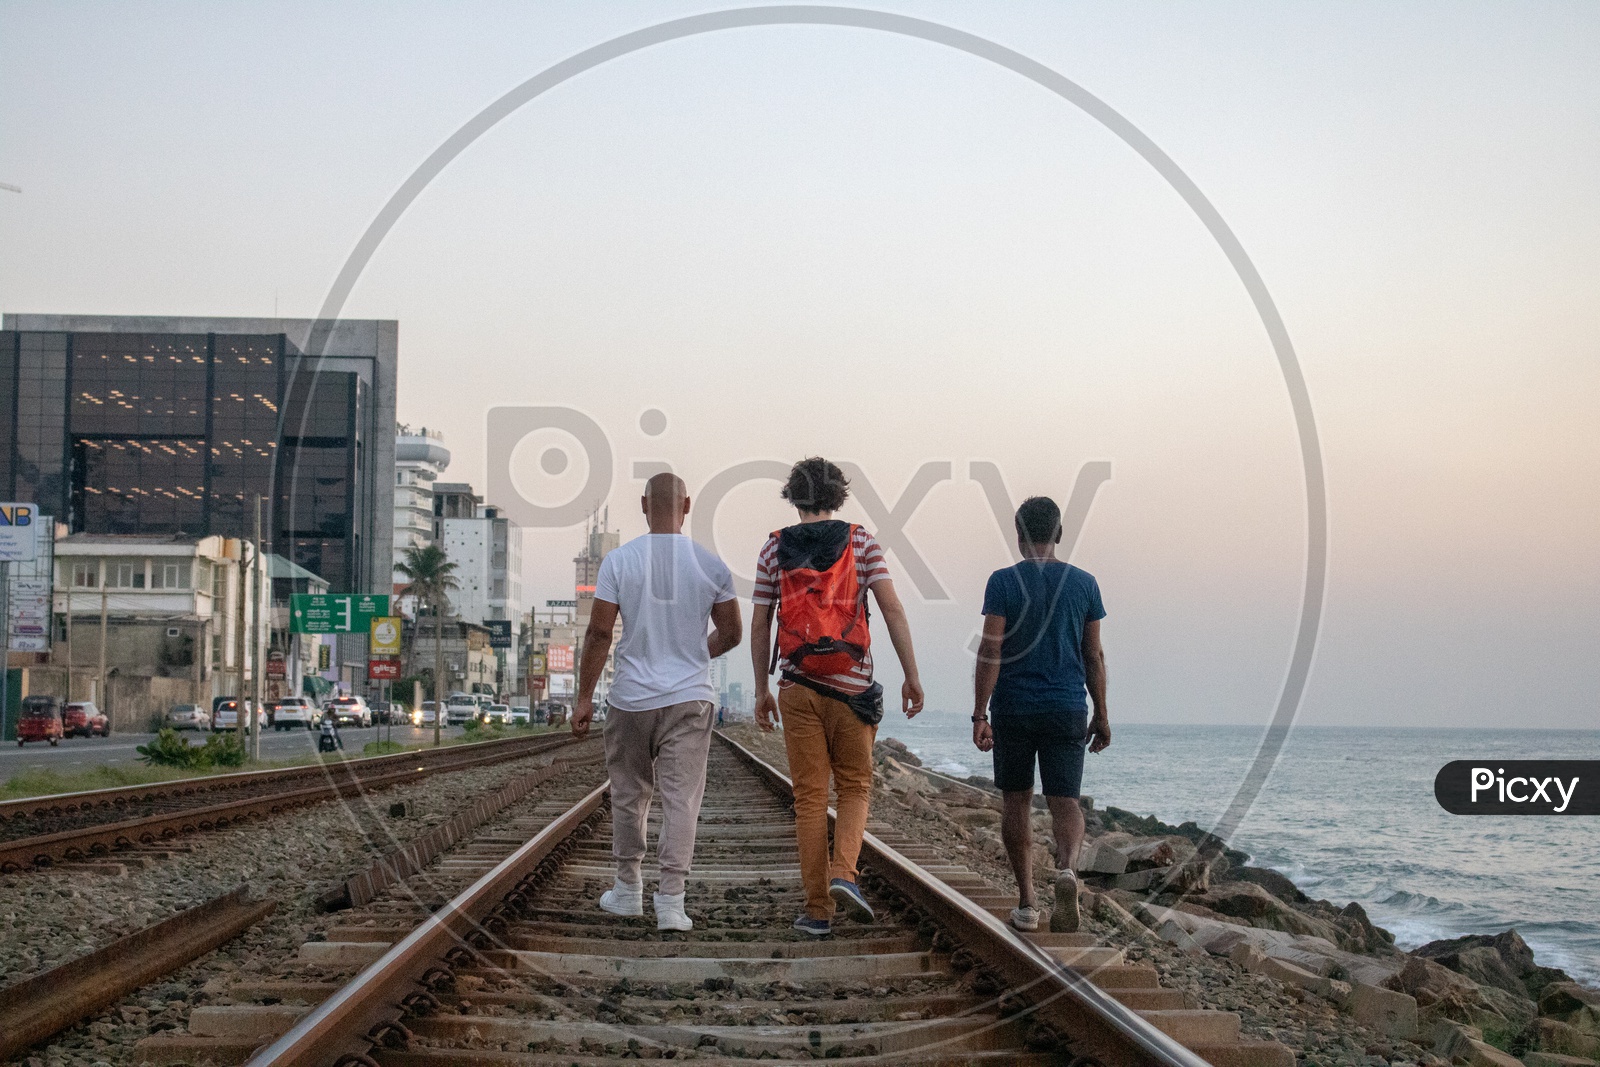 Tourist Friends walking on railway track by the beach in Colombo